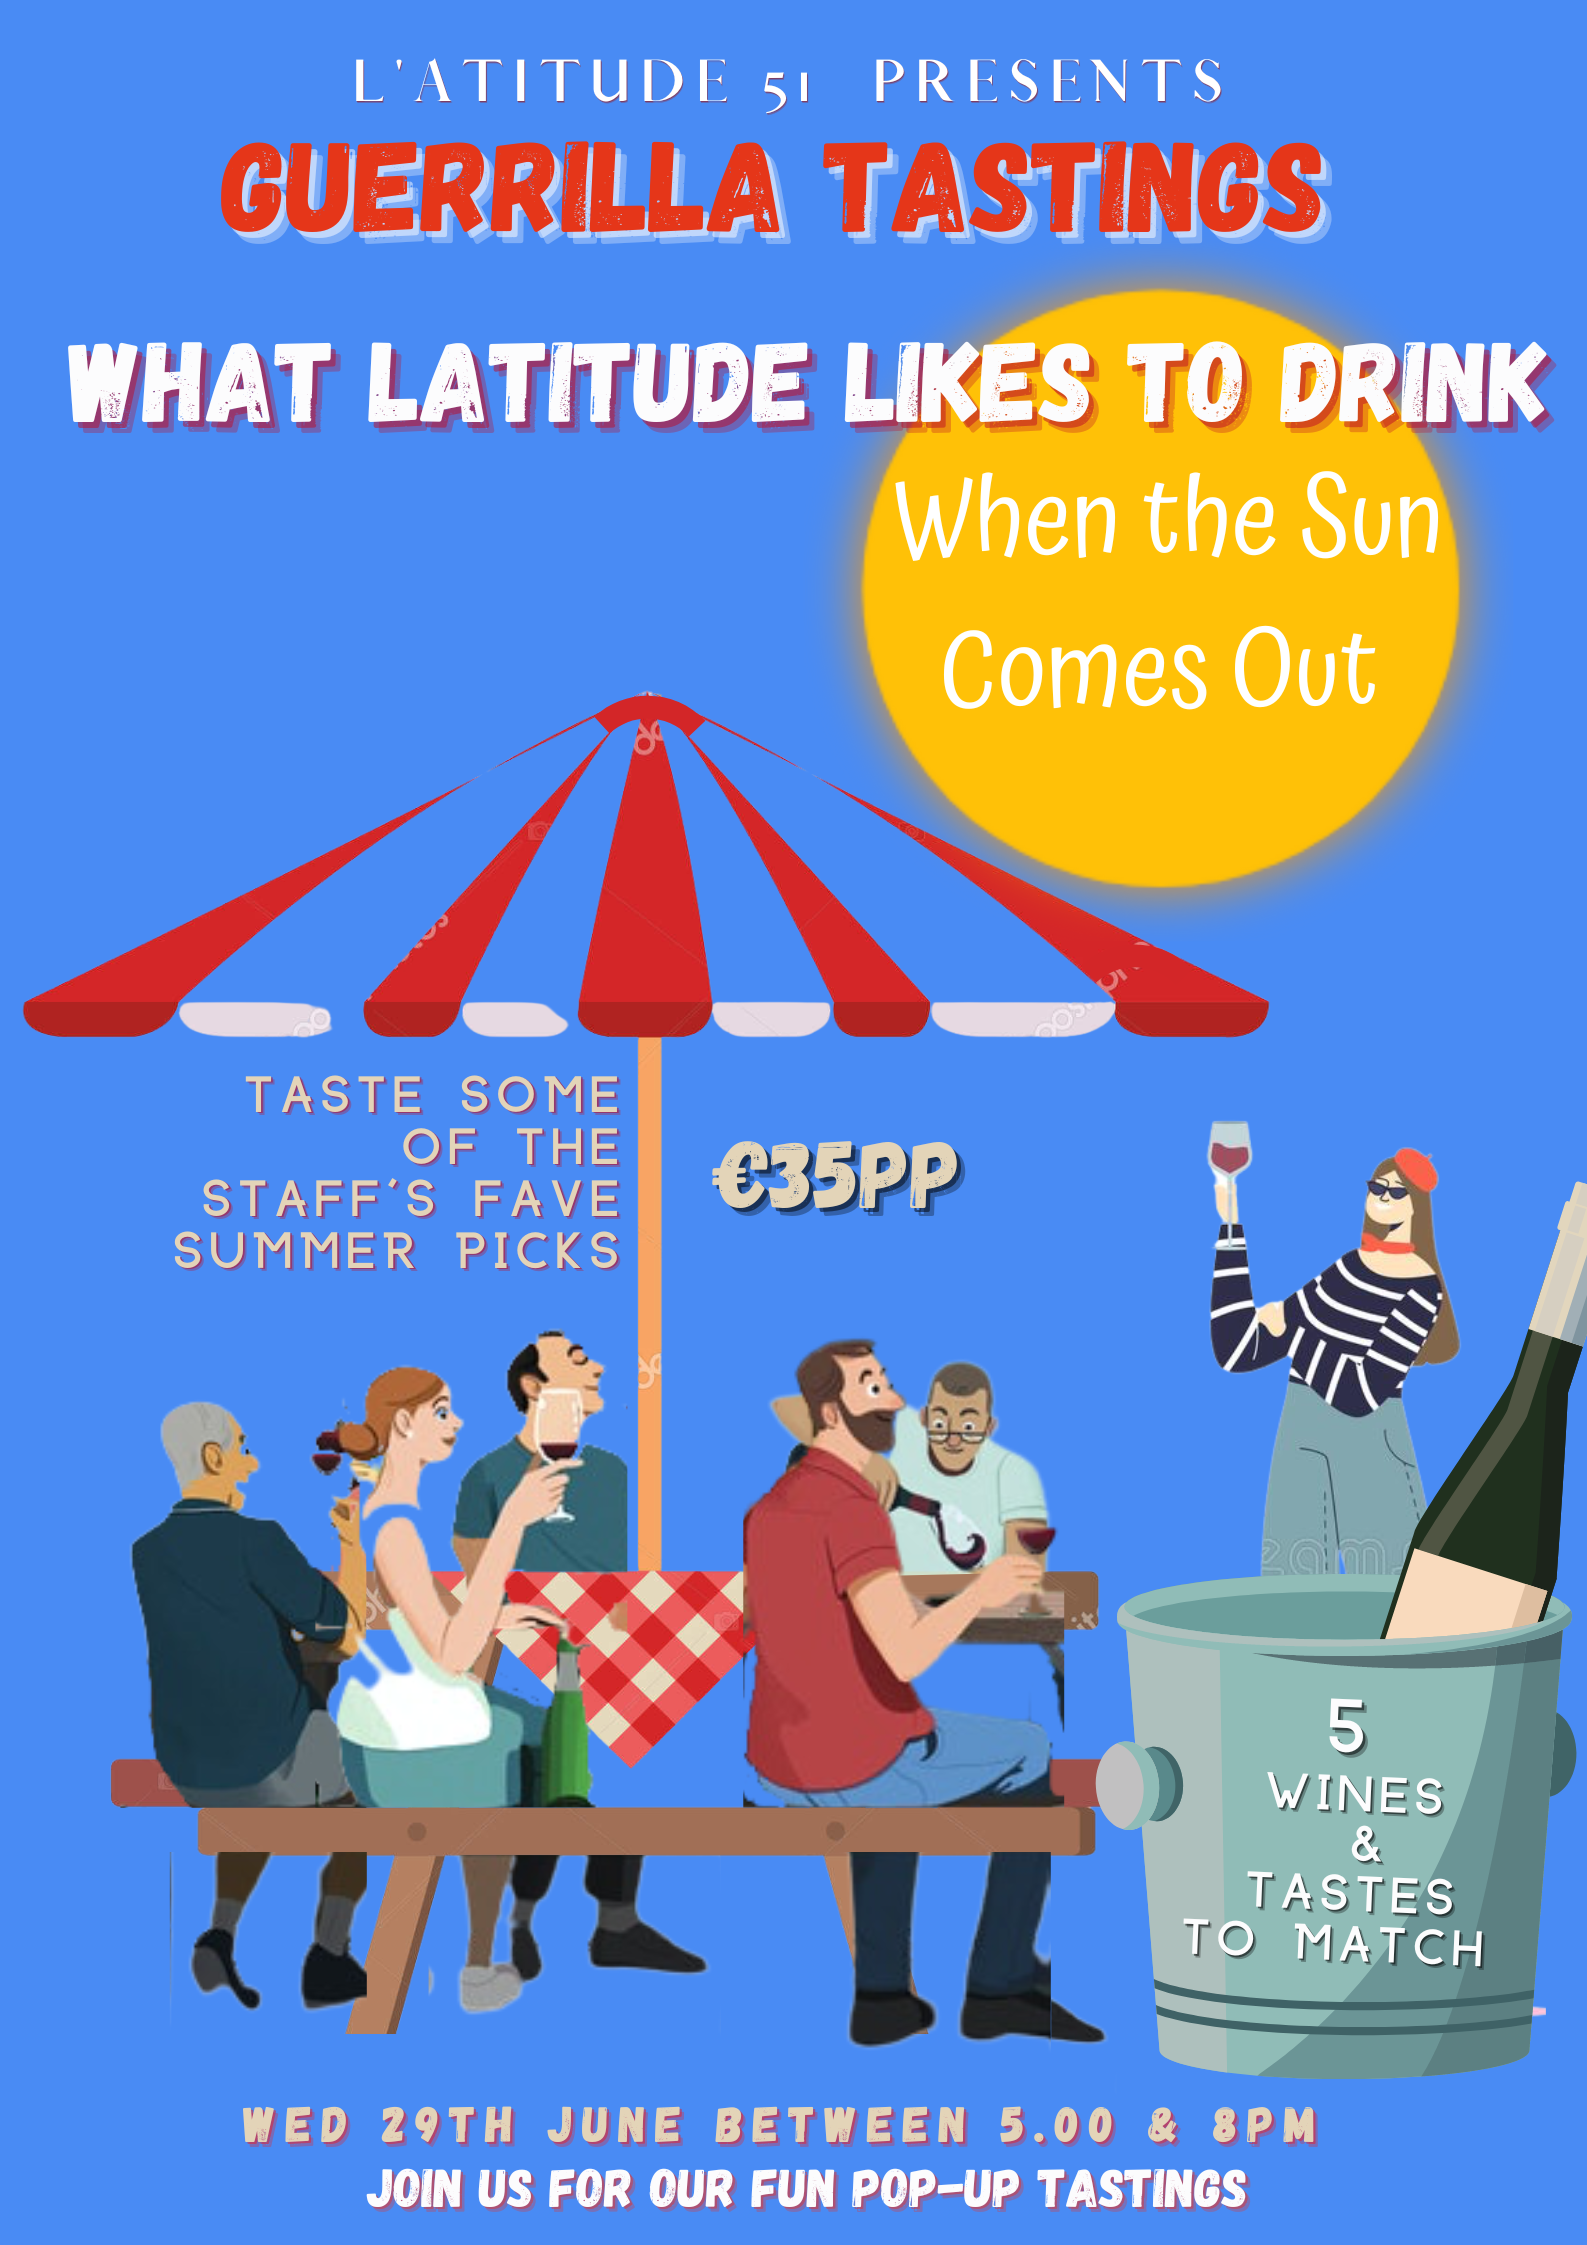 Guerrilla Tastings – What Latitude Likes to Drink When the Sun Comes Out